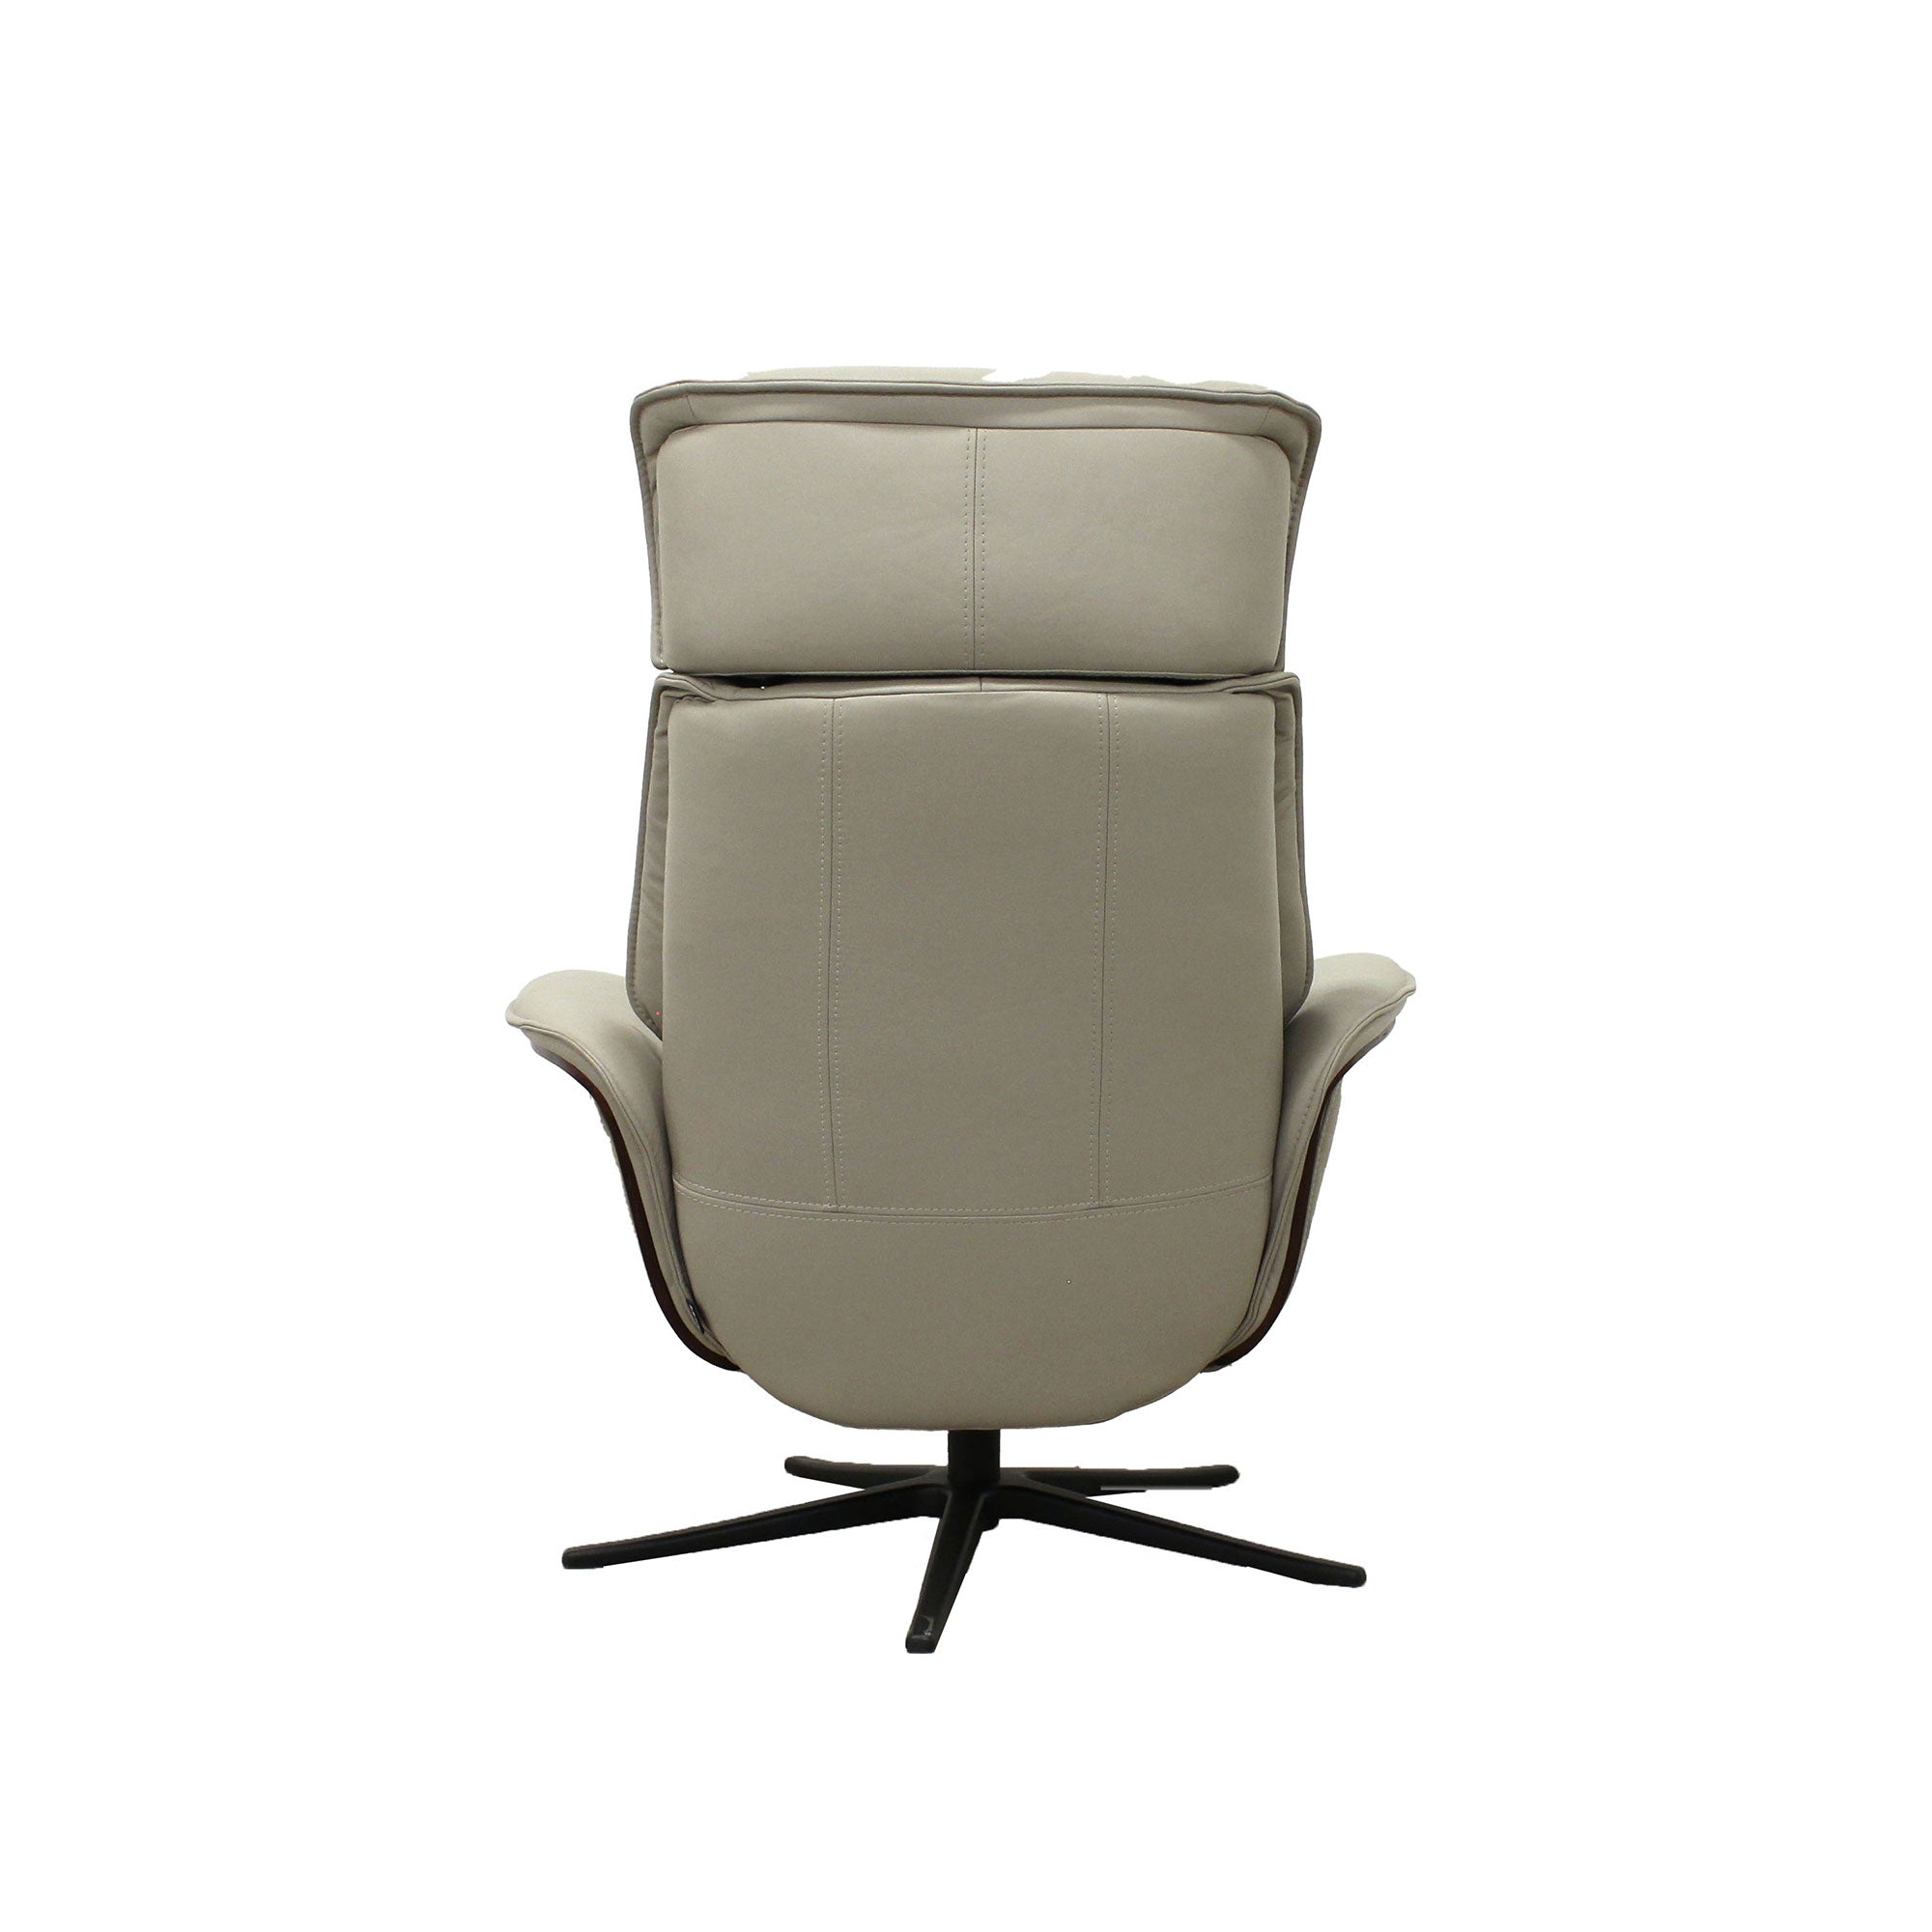 Space 5400 Reclining Chair